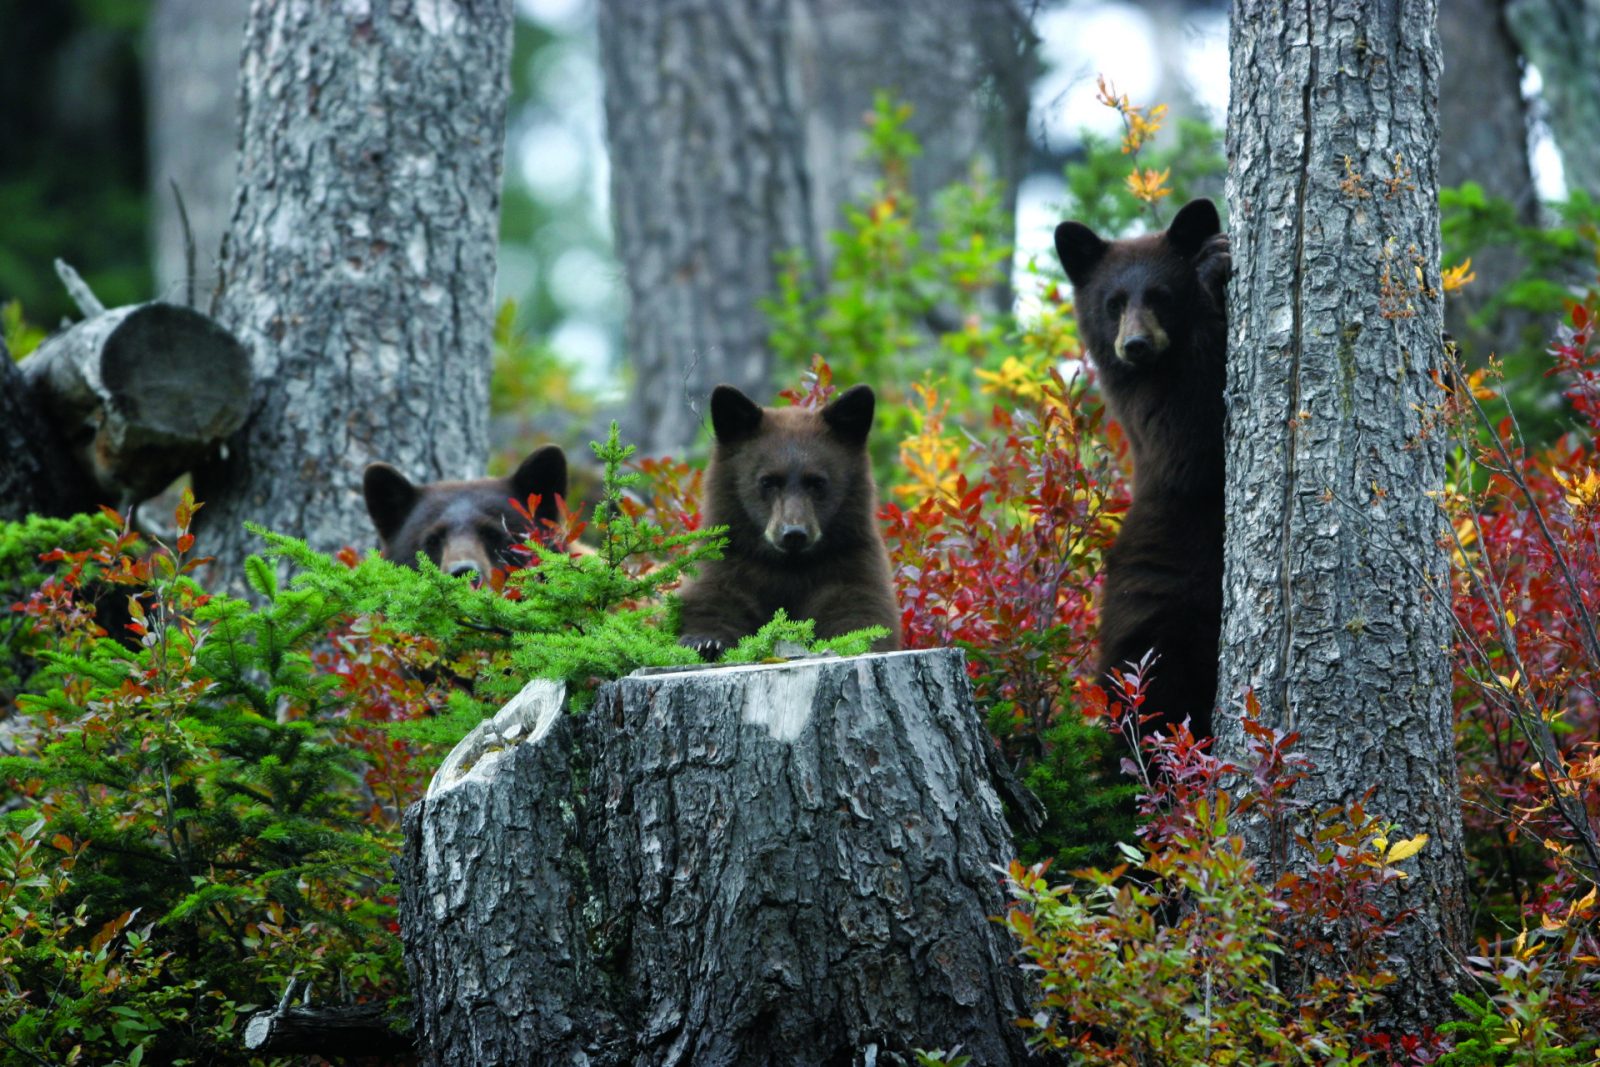 Several of the local bear residents of Whistler captured by Michael Allen, Tourism Whistler.